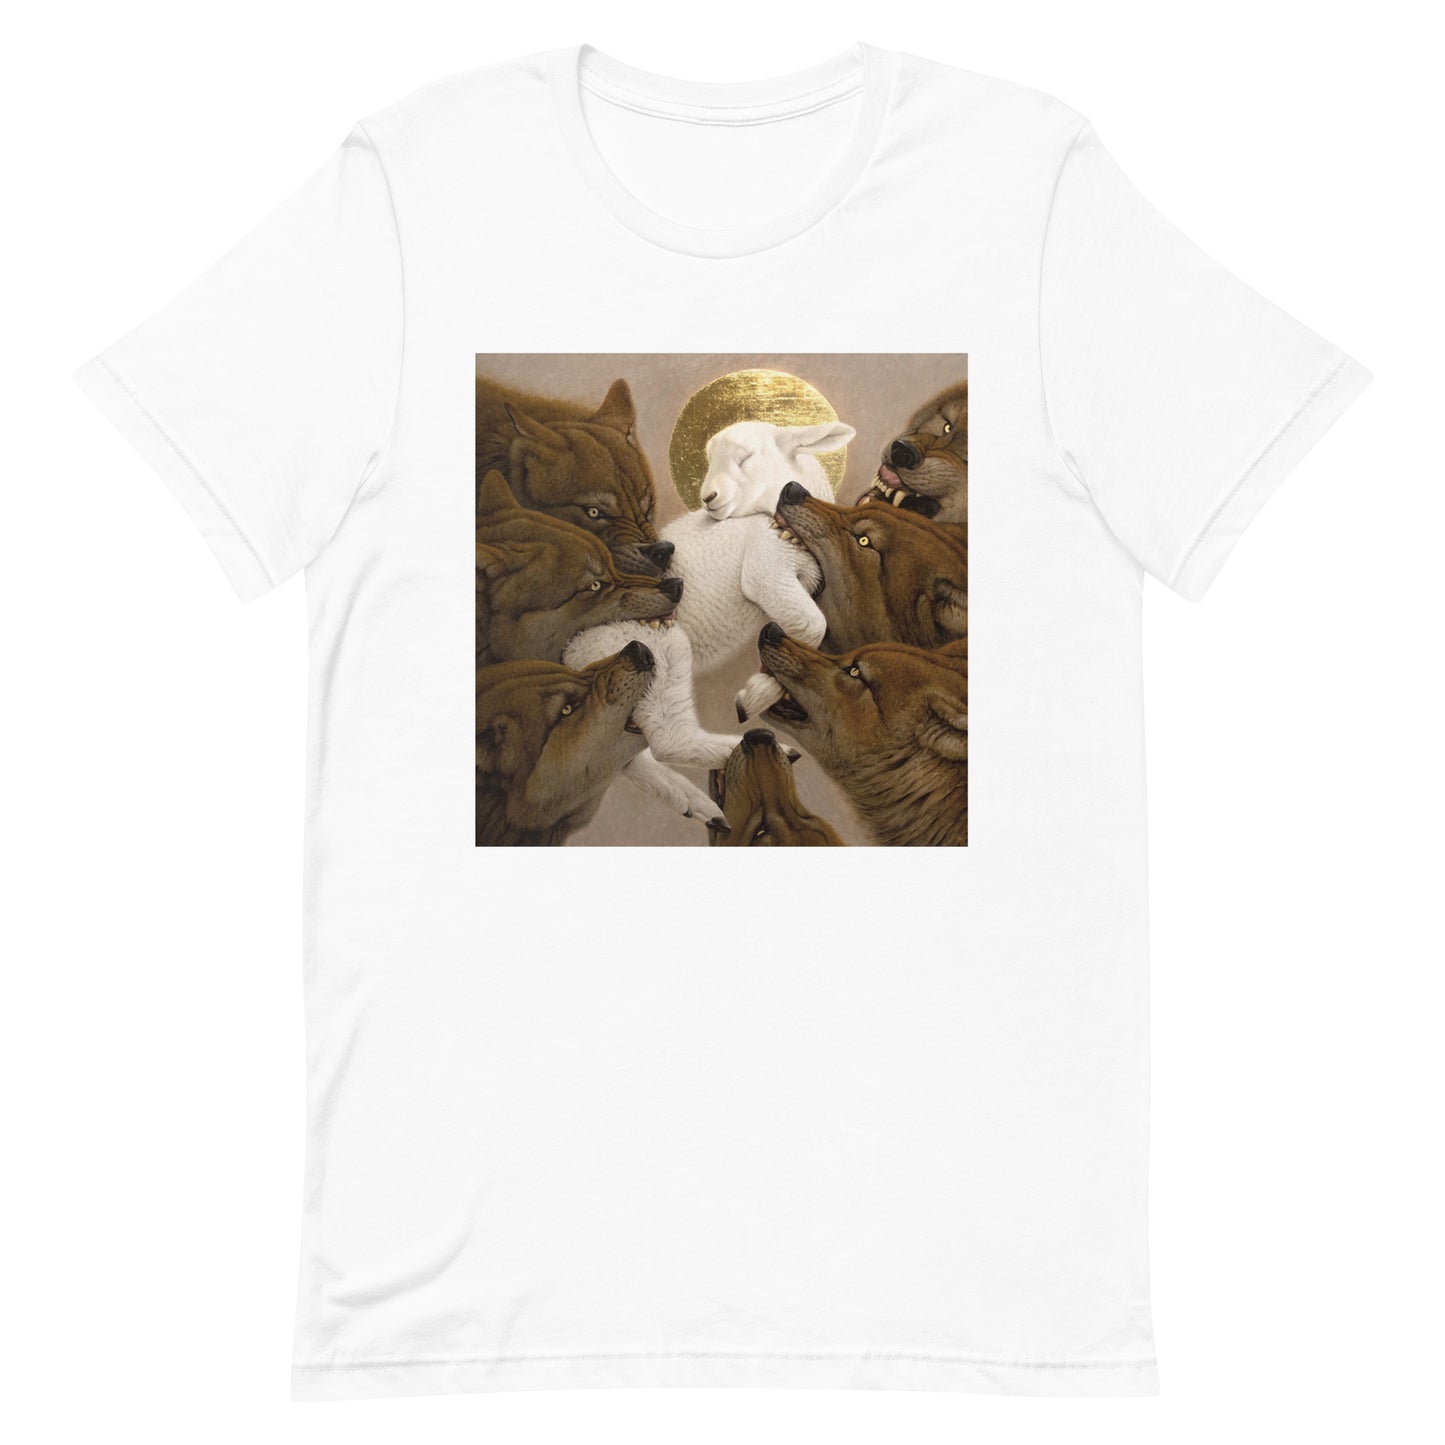 Lamb and Wolves| Unisex t-shirt